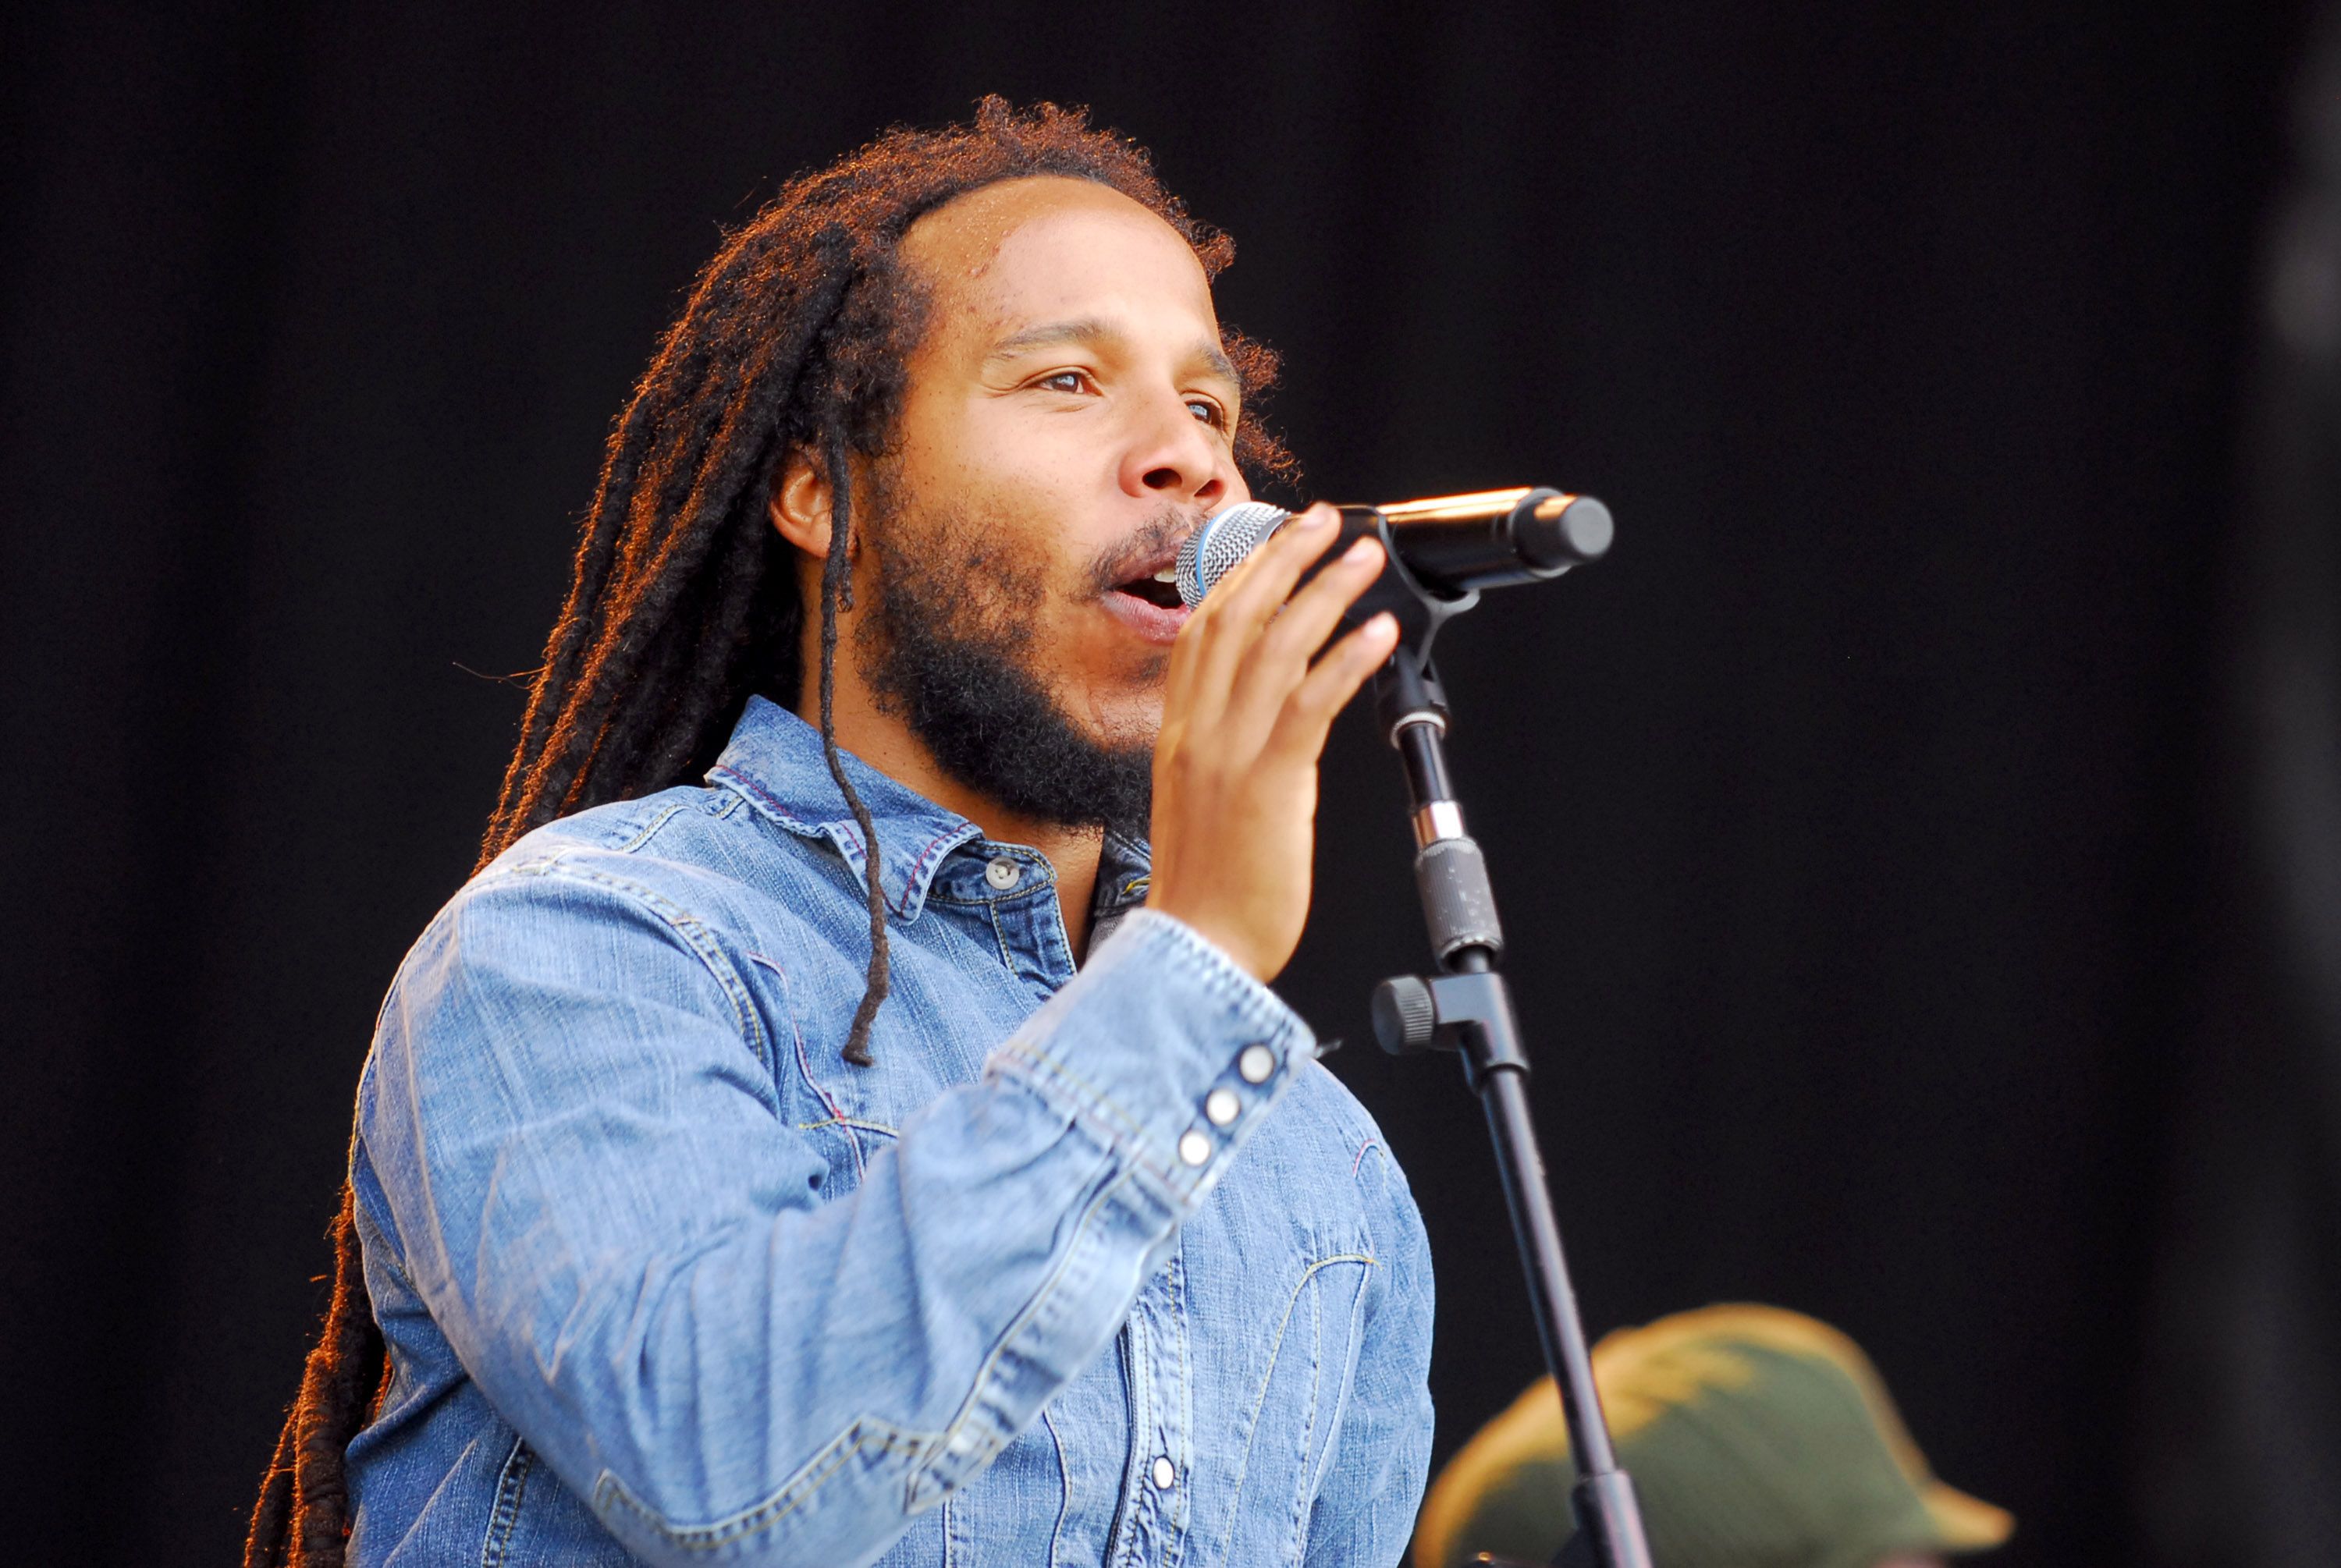 Ziggy Marley sings in Manchester, Tennessee, at the Bonnaroo Music and Arts Festival in 2007 | Source: Getty Images